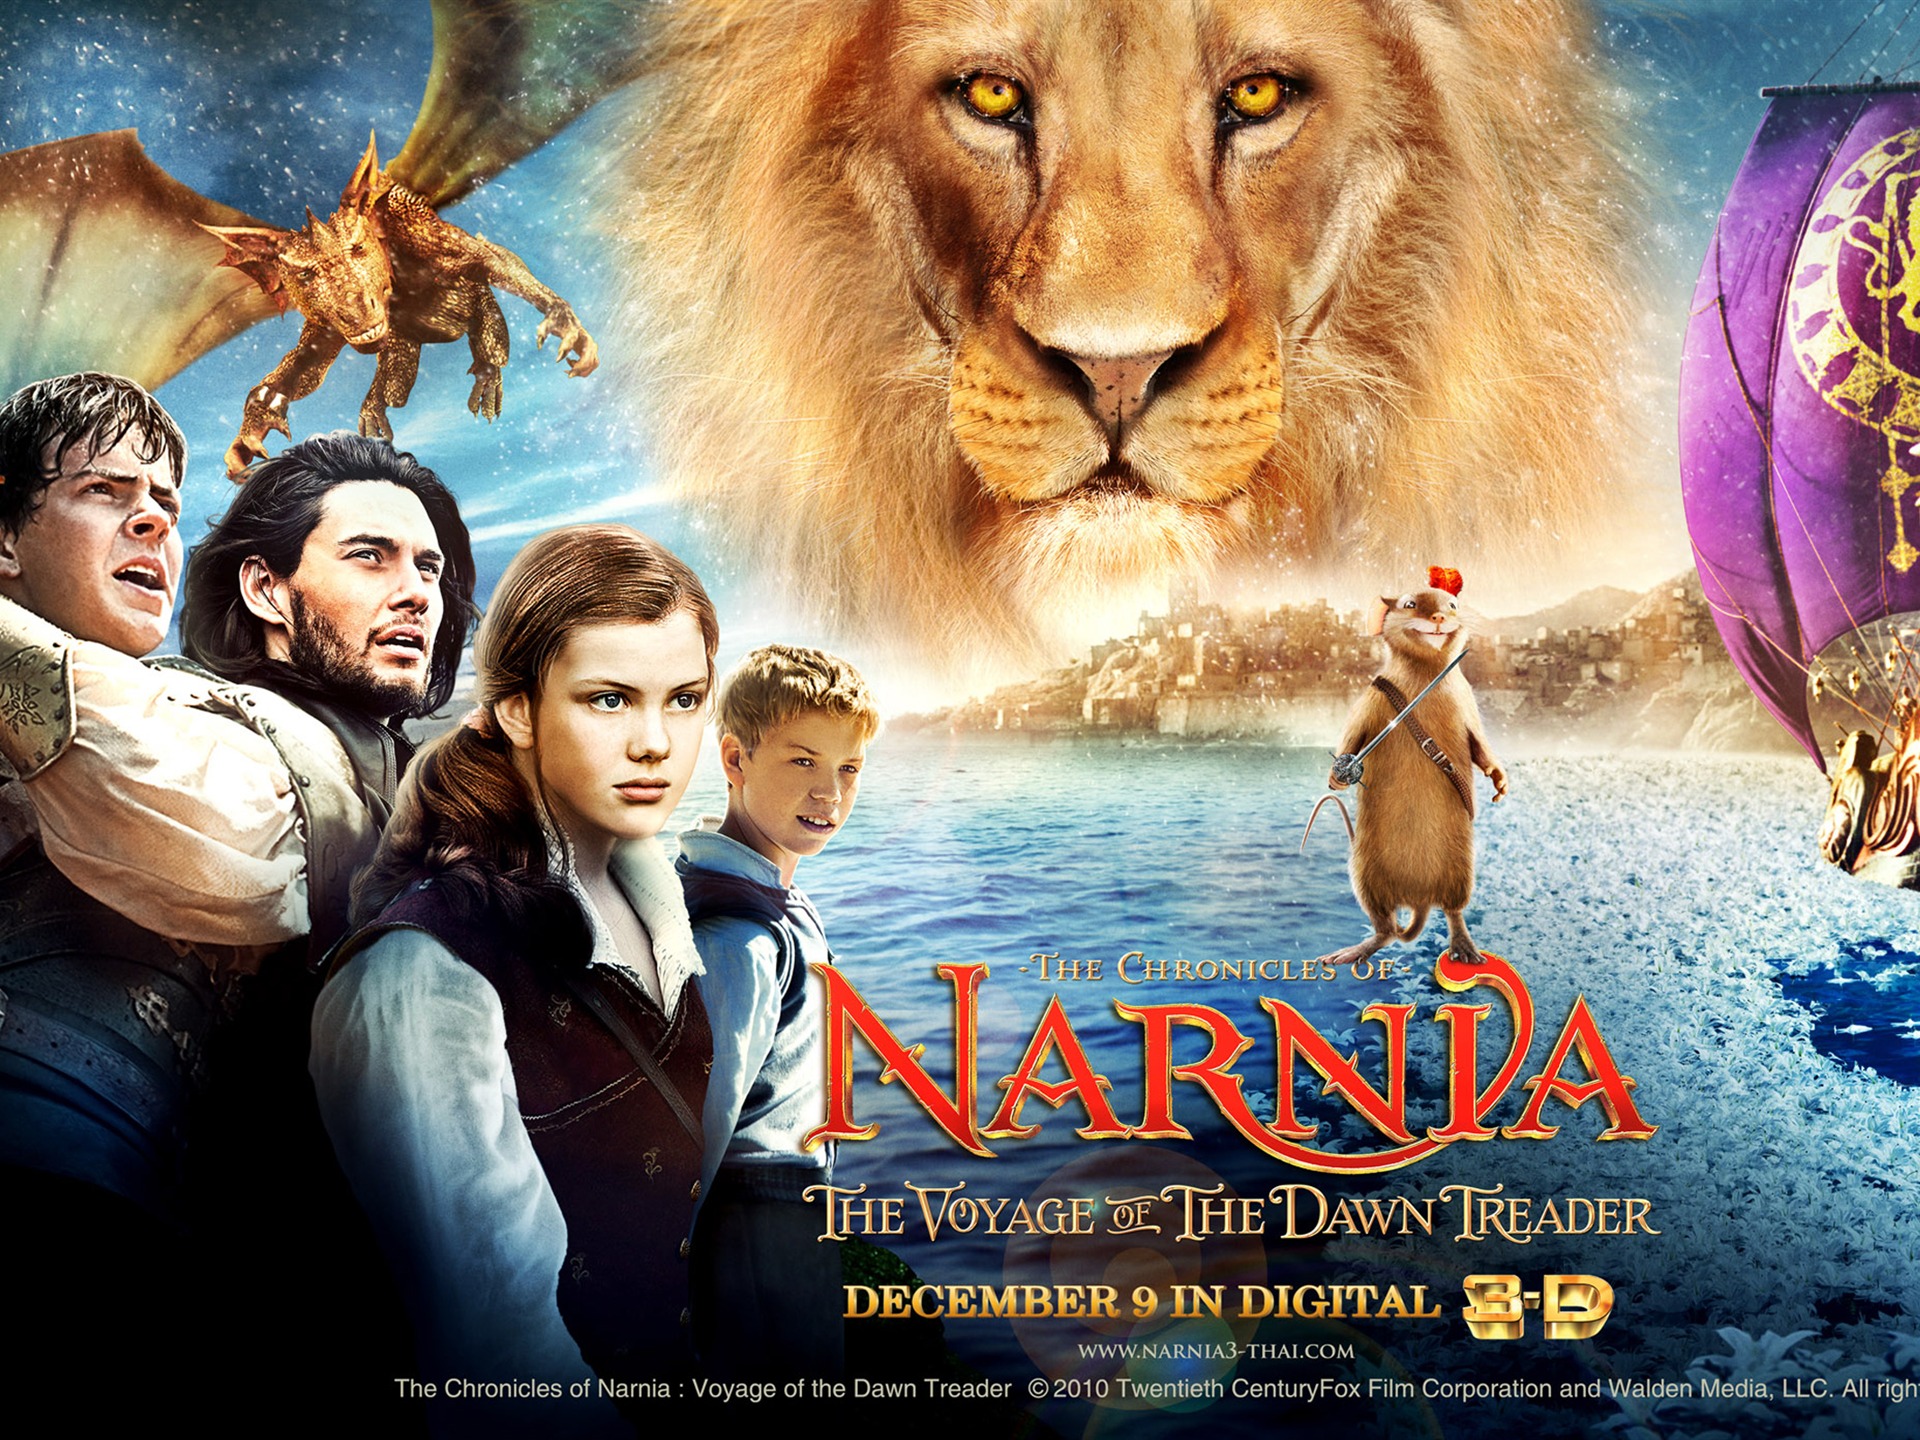 The Chronicles of Narnia: The Voyage of the Dawn Treader wallpapers #14 - 1920x1440